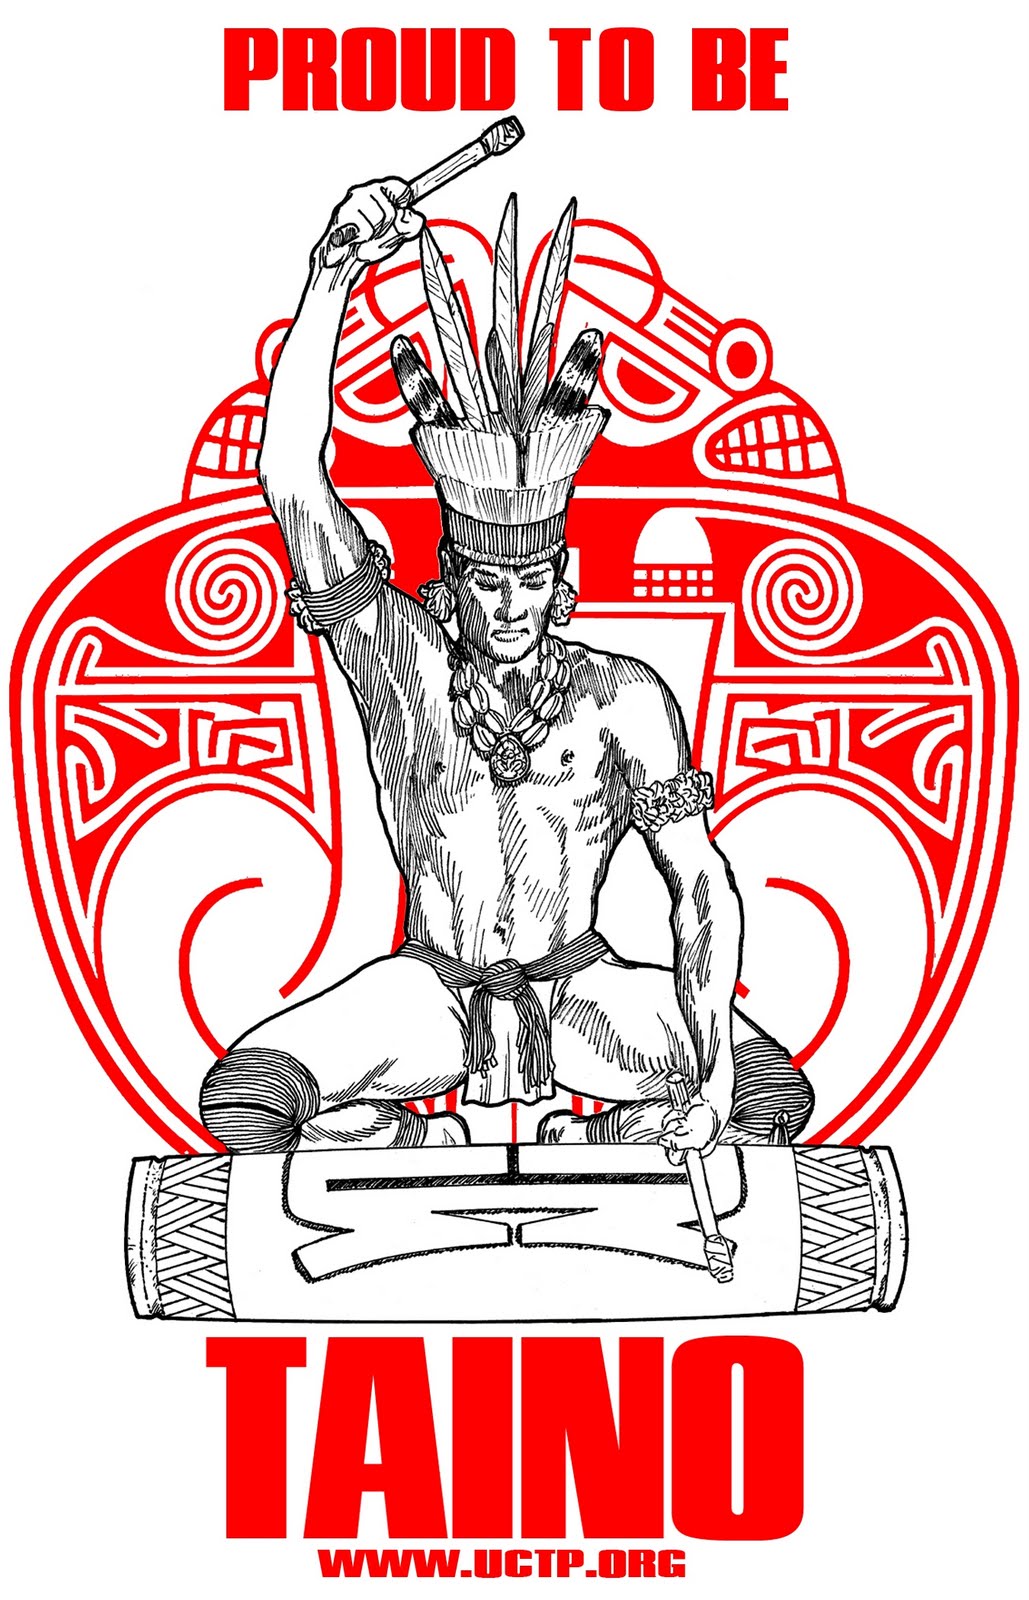 The Voice of the Taino People Online: Taíno Artist Donates Images to